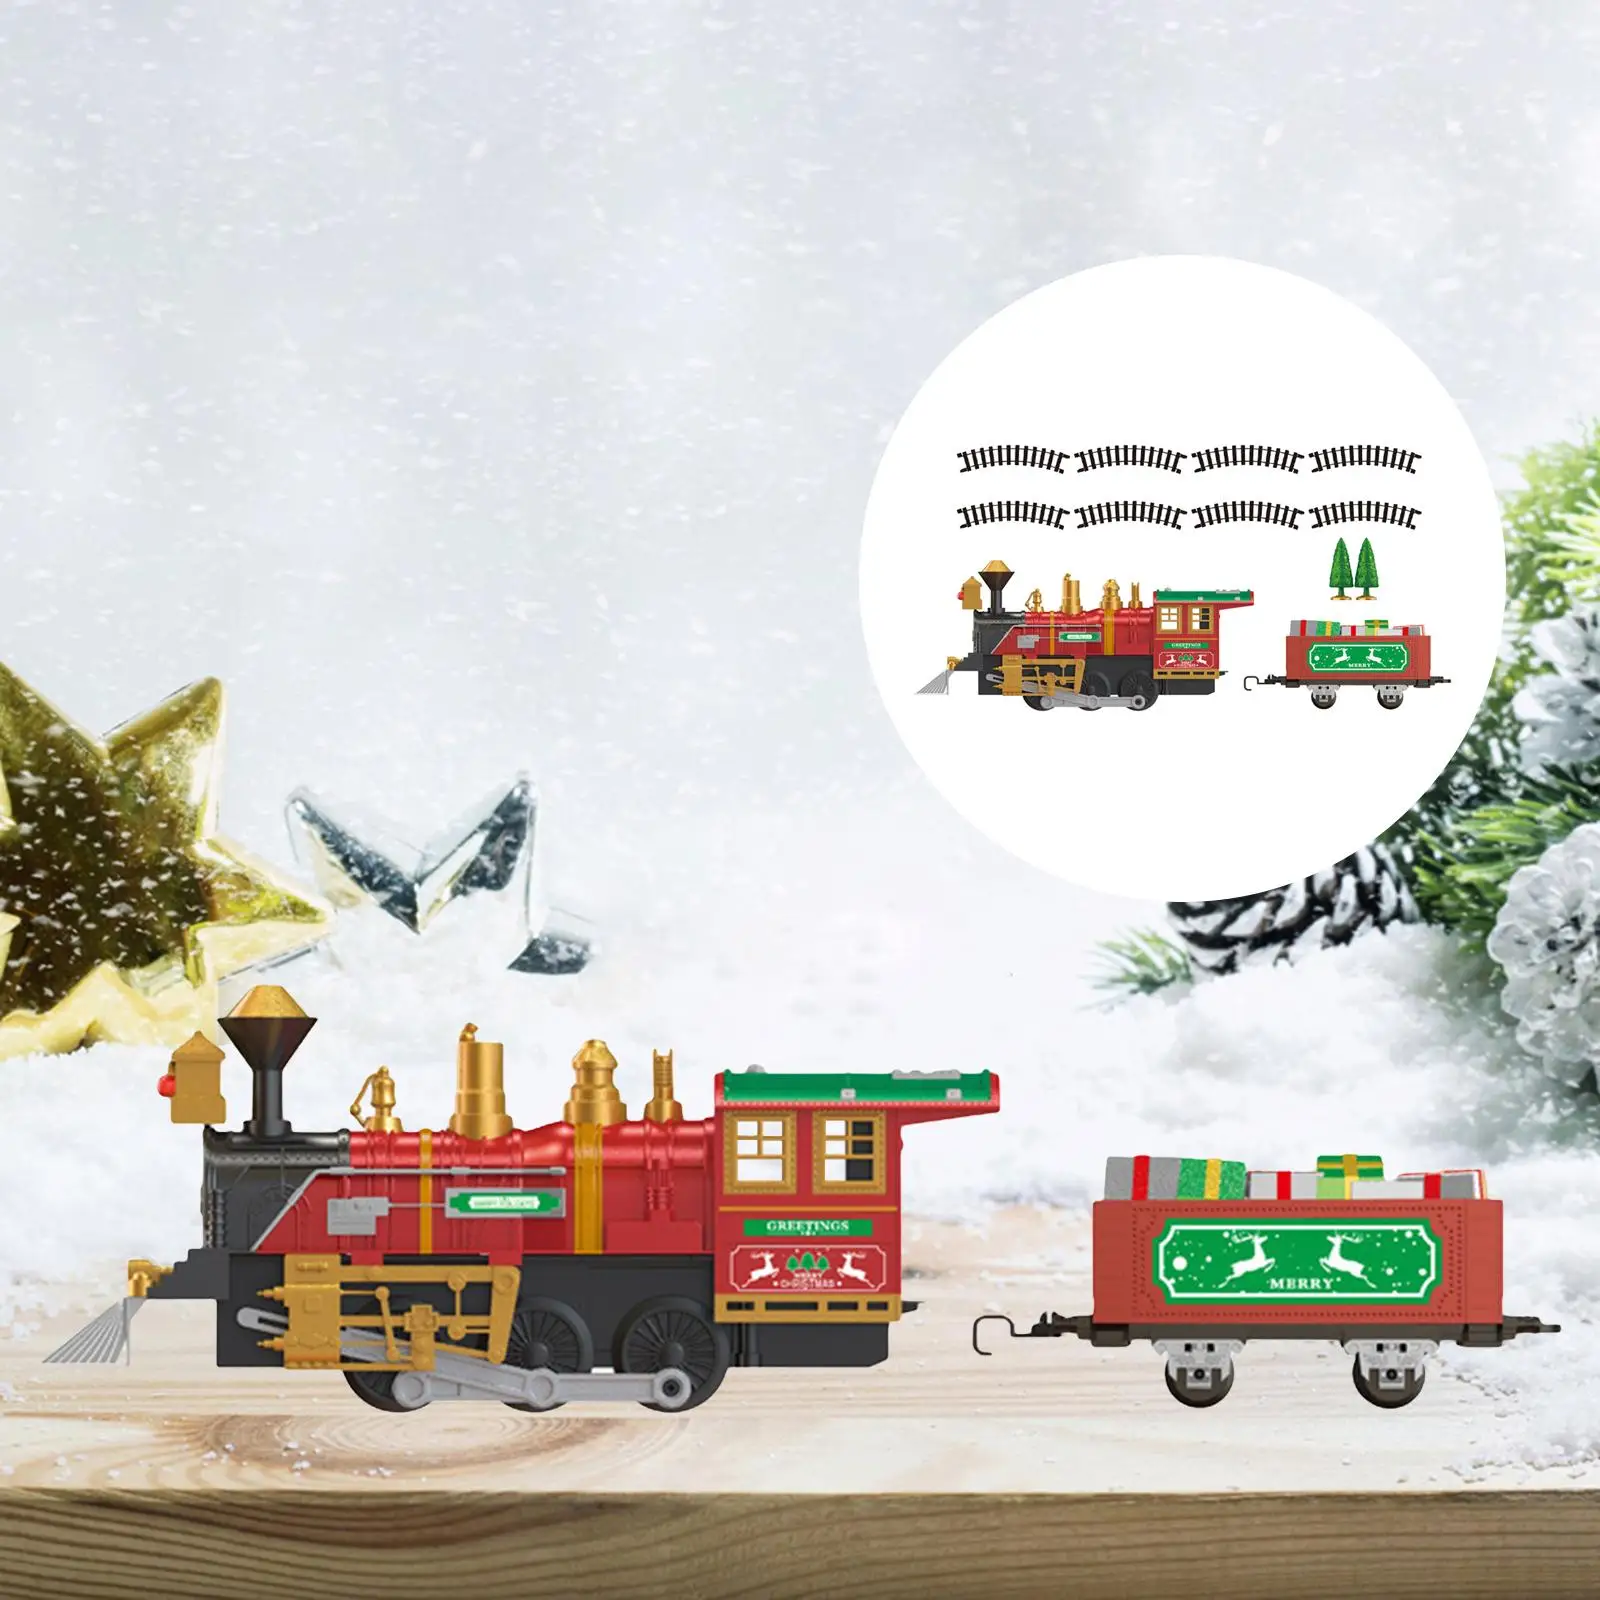 8 Tracks Christmas Train Set Railway Train Set Cute with Locomotive Electric Train Set for party Interaction Christmas